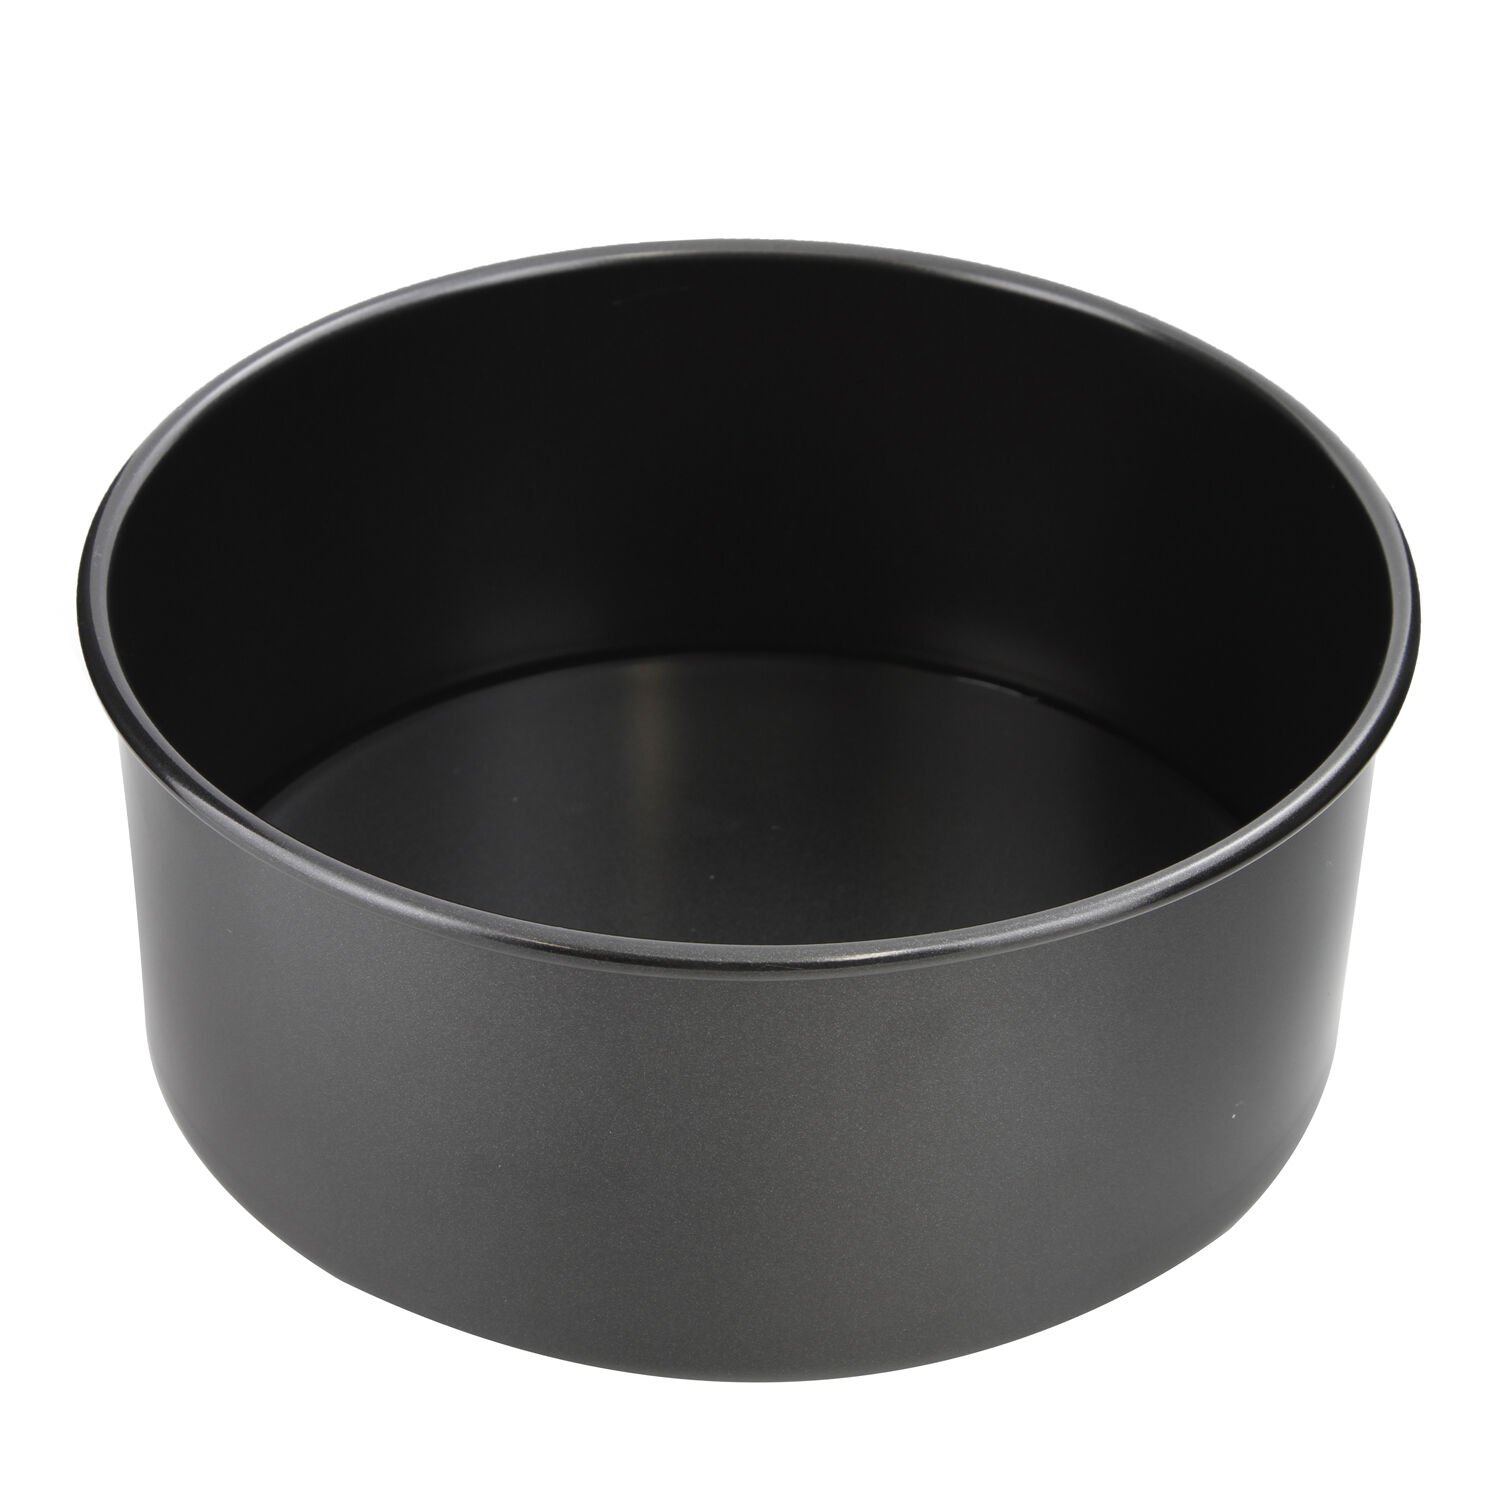 https://www.homestoreandmore.ie/dw/image/v2/BCBN_PRD/on/demandware.static/-/Sites-master/default/dw365400be/images/Bakers-Select-Deep-Round-Cake-Tin-8%22-baking-trays-dishes-064436-hi-res-0.jpg?sw=1500